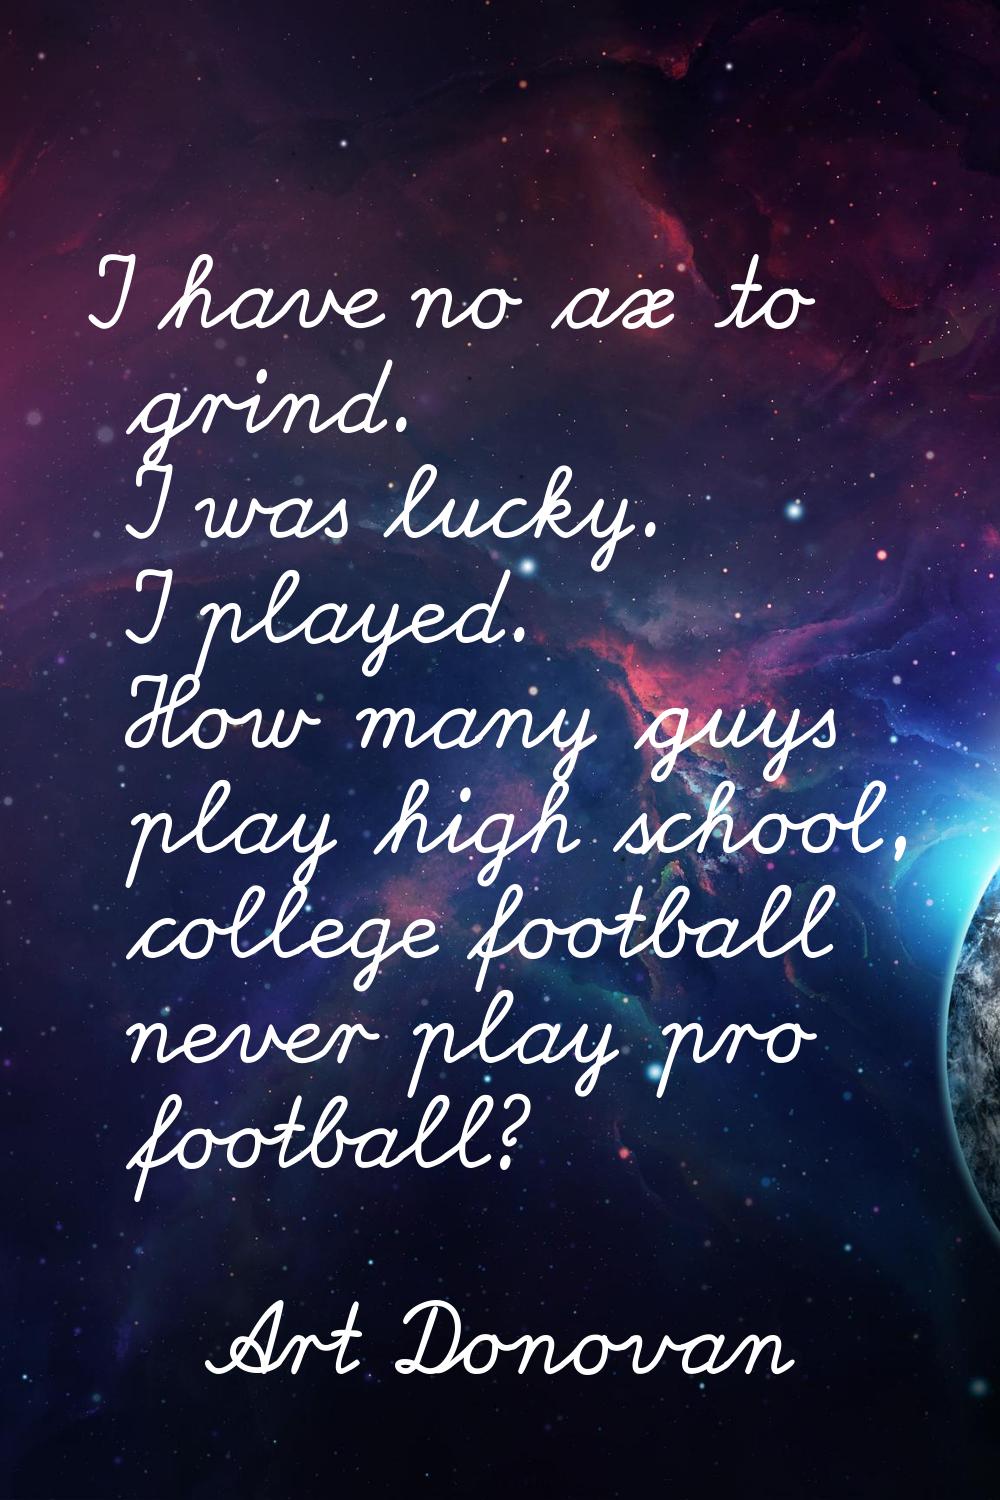 I have no ax to grind. I was lucky. I played. How many guys play high school, college football neve